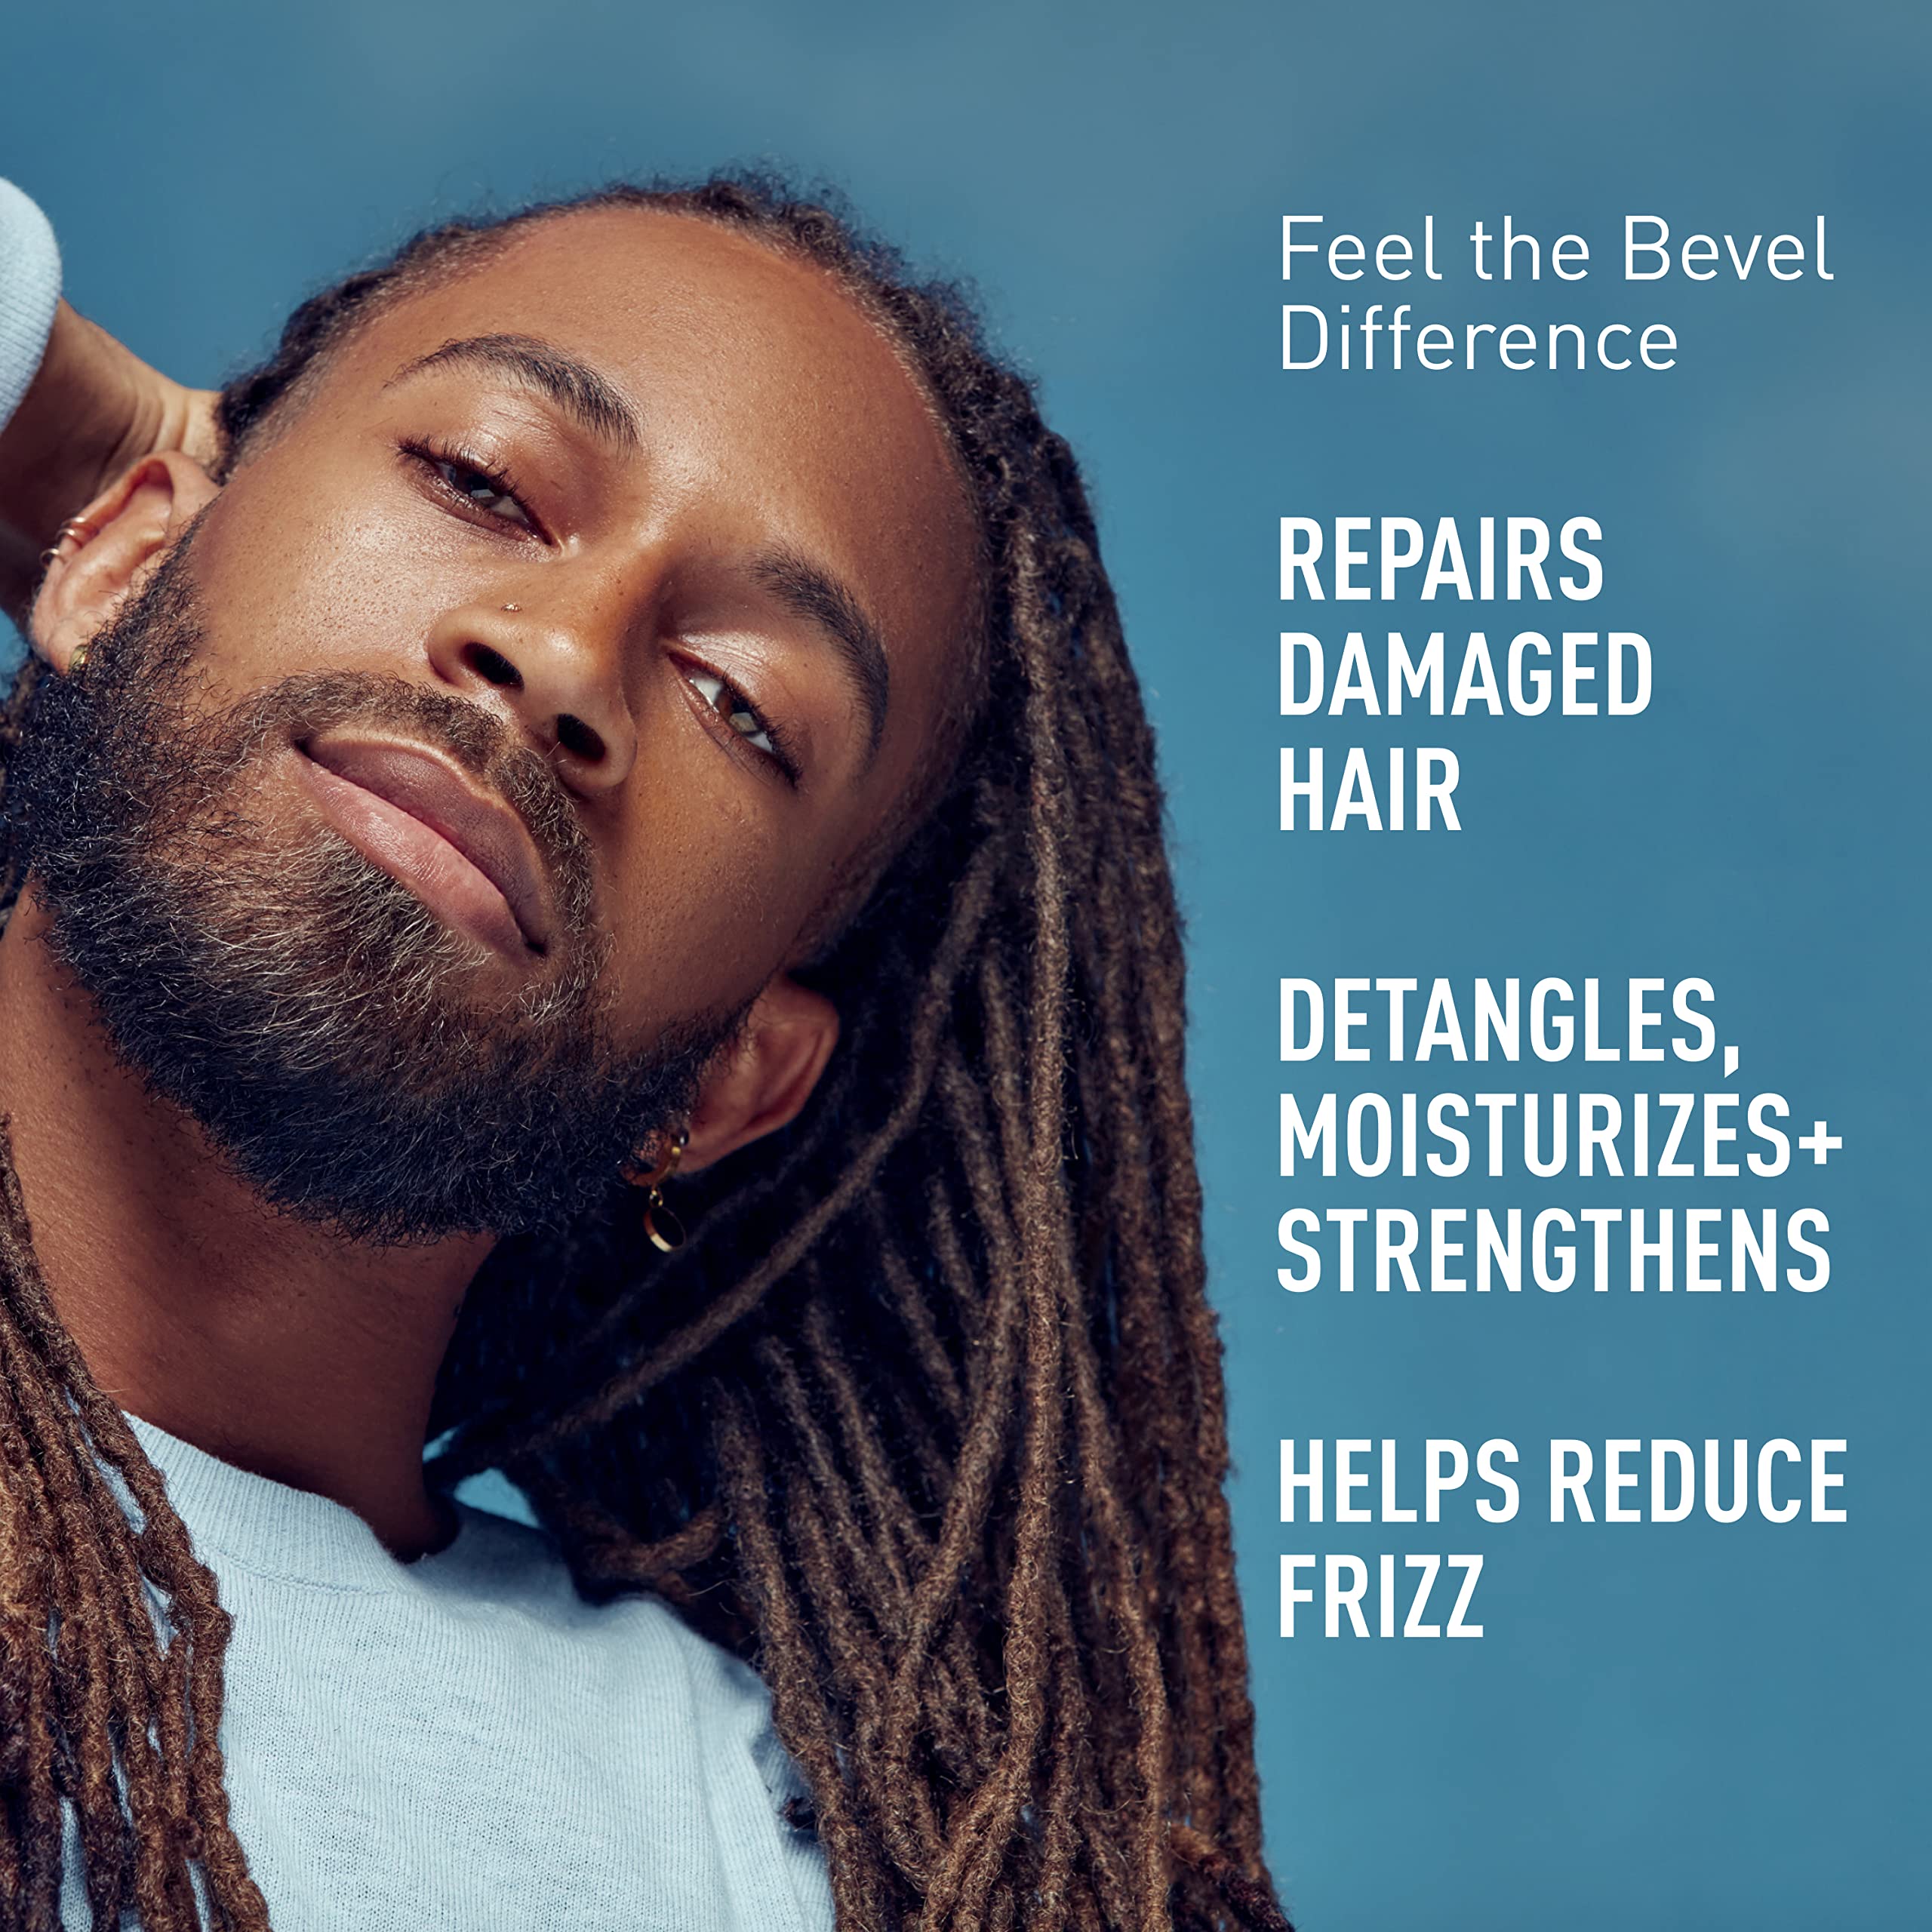 Bevel Leave In Conditioner for Men - Curly Hair Conditioner with Hemp Seed Oil and Biotin, Detangles Moisturizes and Strengthens Hair, 7 Oz